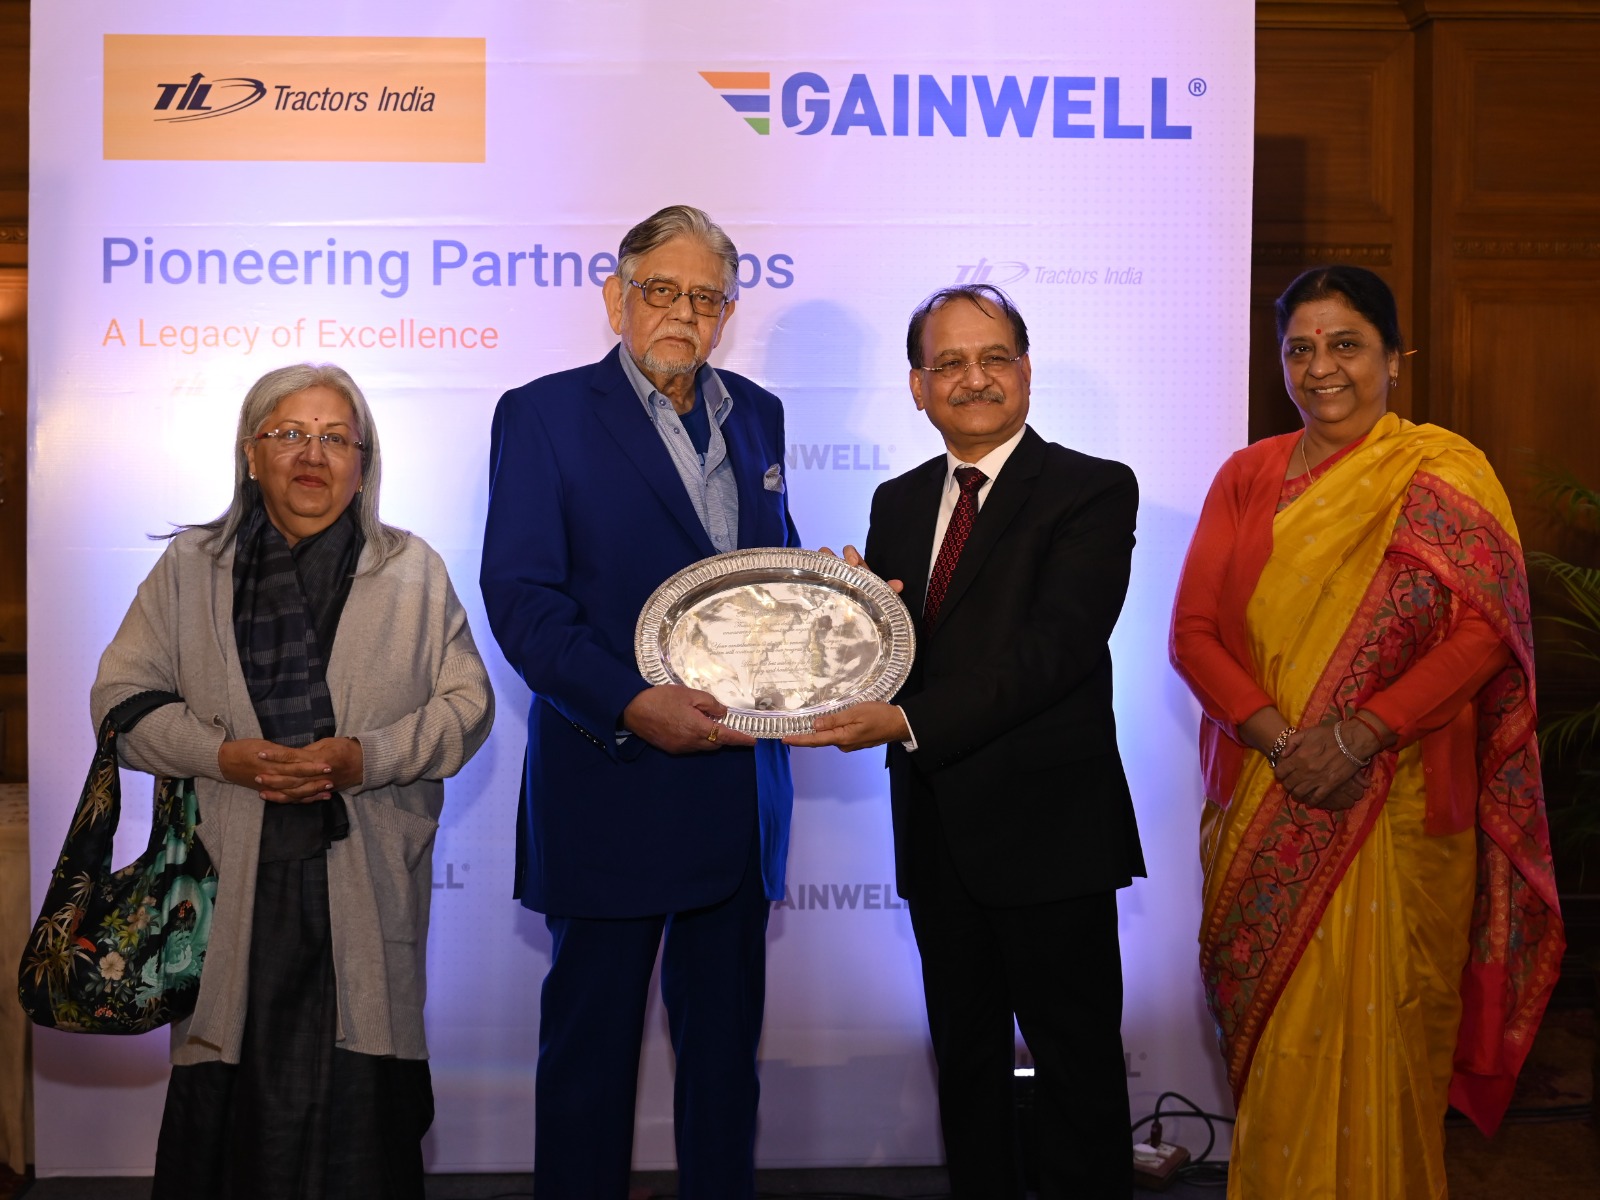 Gainwell Group Acquires Iconic Infra Equipment Manufacturer TIL Limited